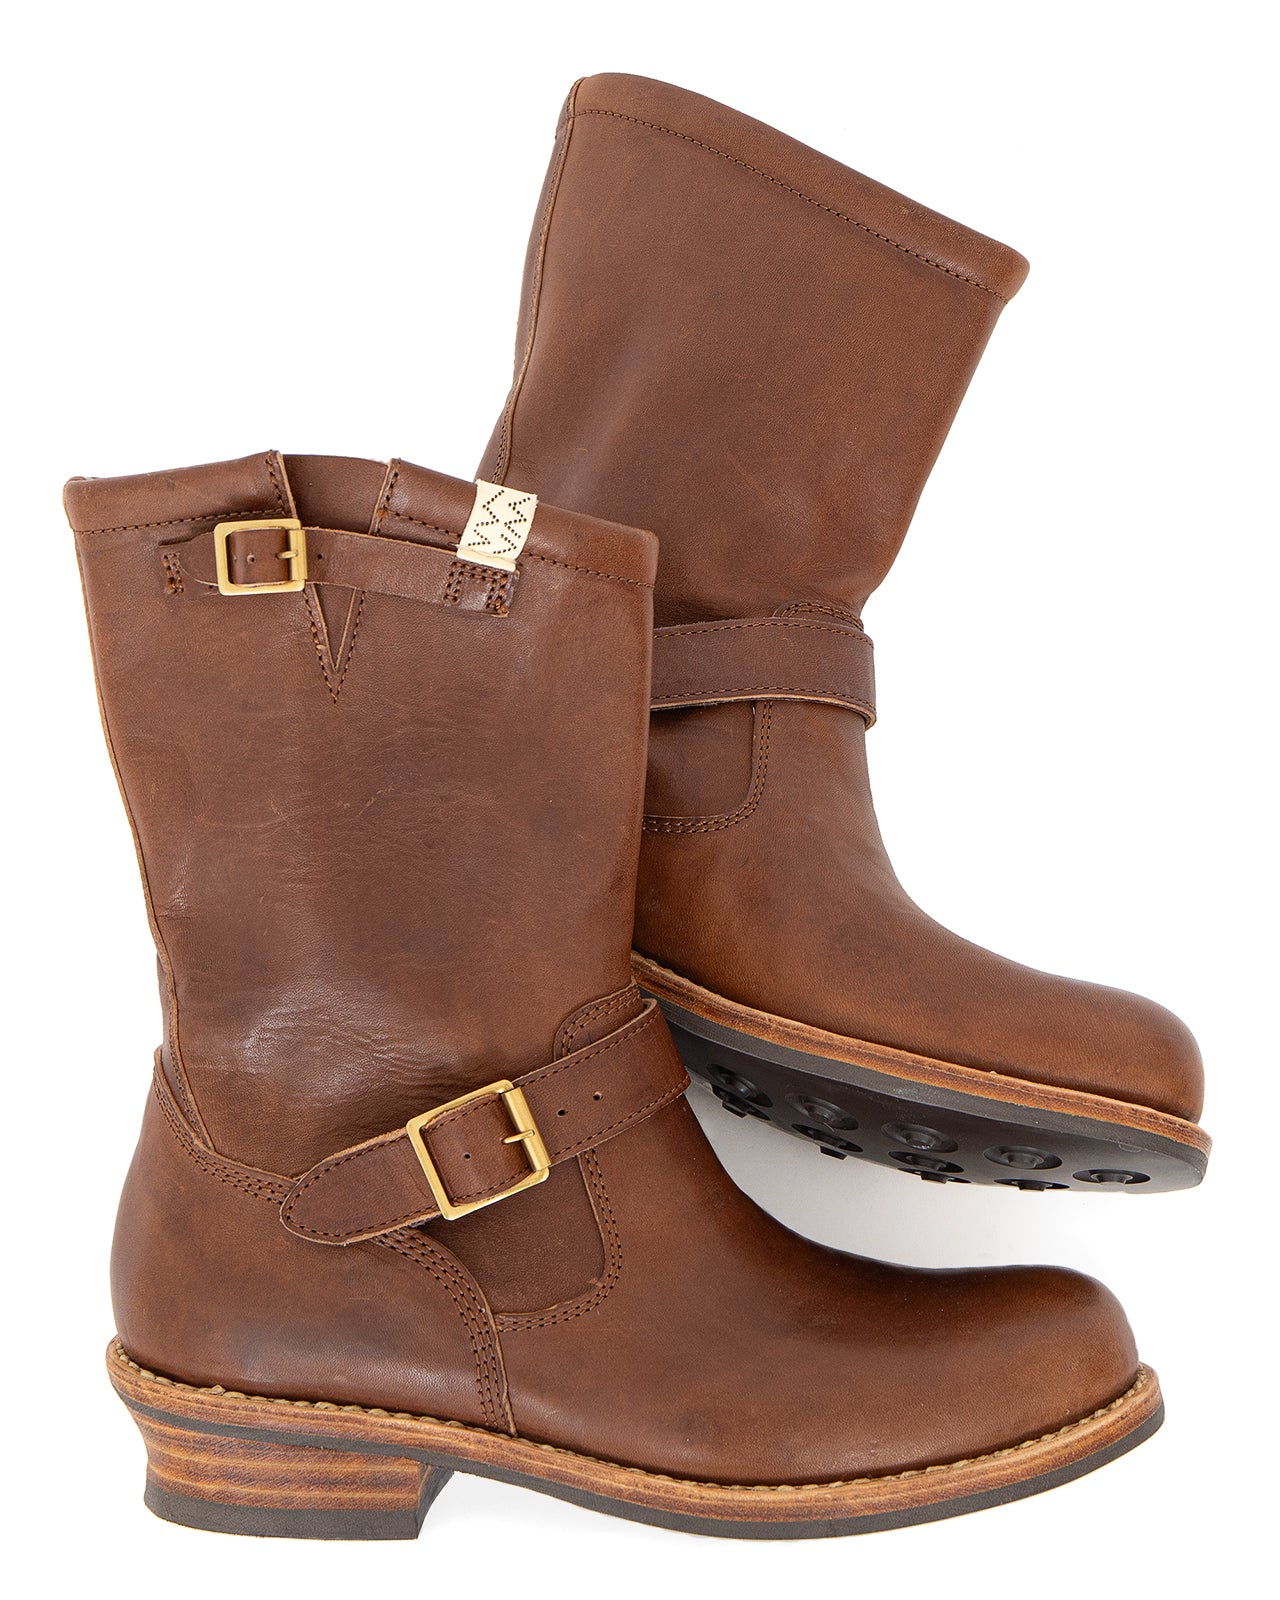 Landers Boots-Folk, Brown - Pancho Online Store Pancho And Lefty - Online Store